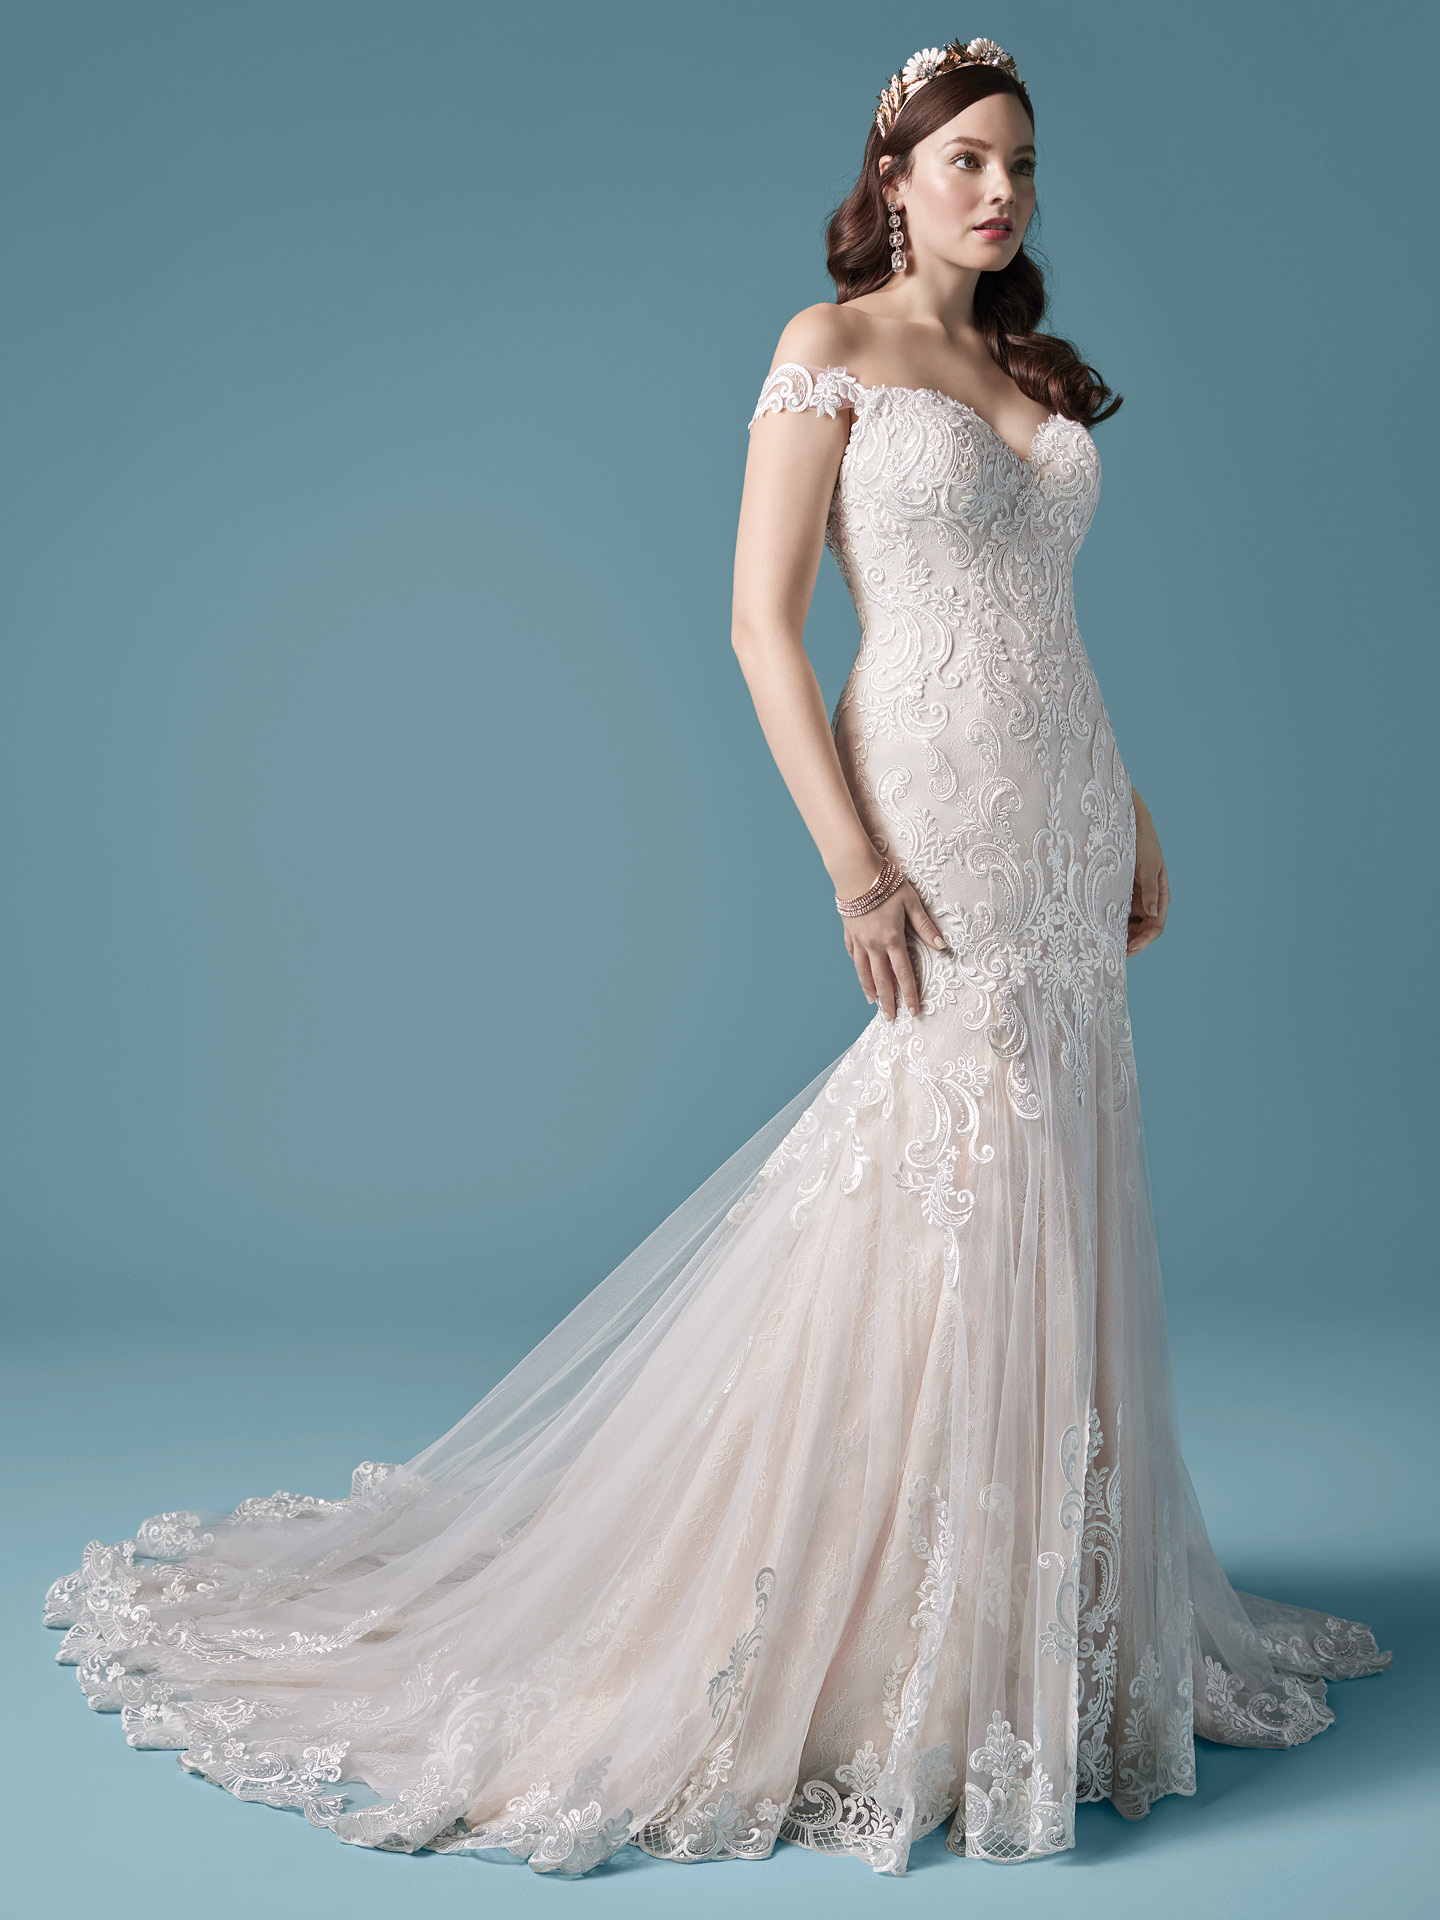 View All | Maggie Sottero View All